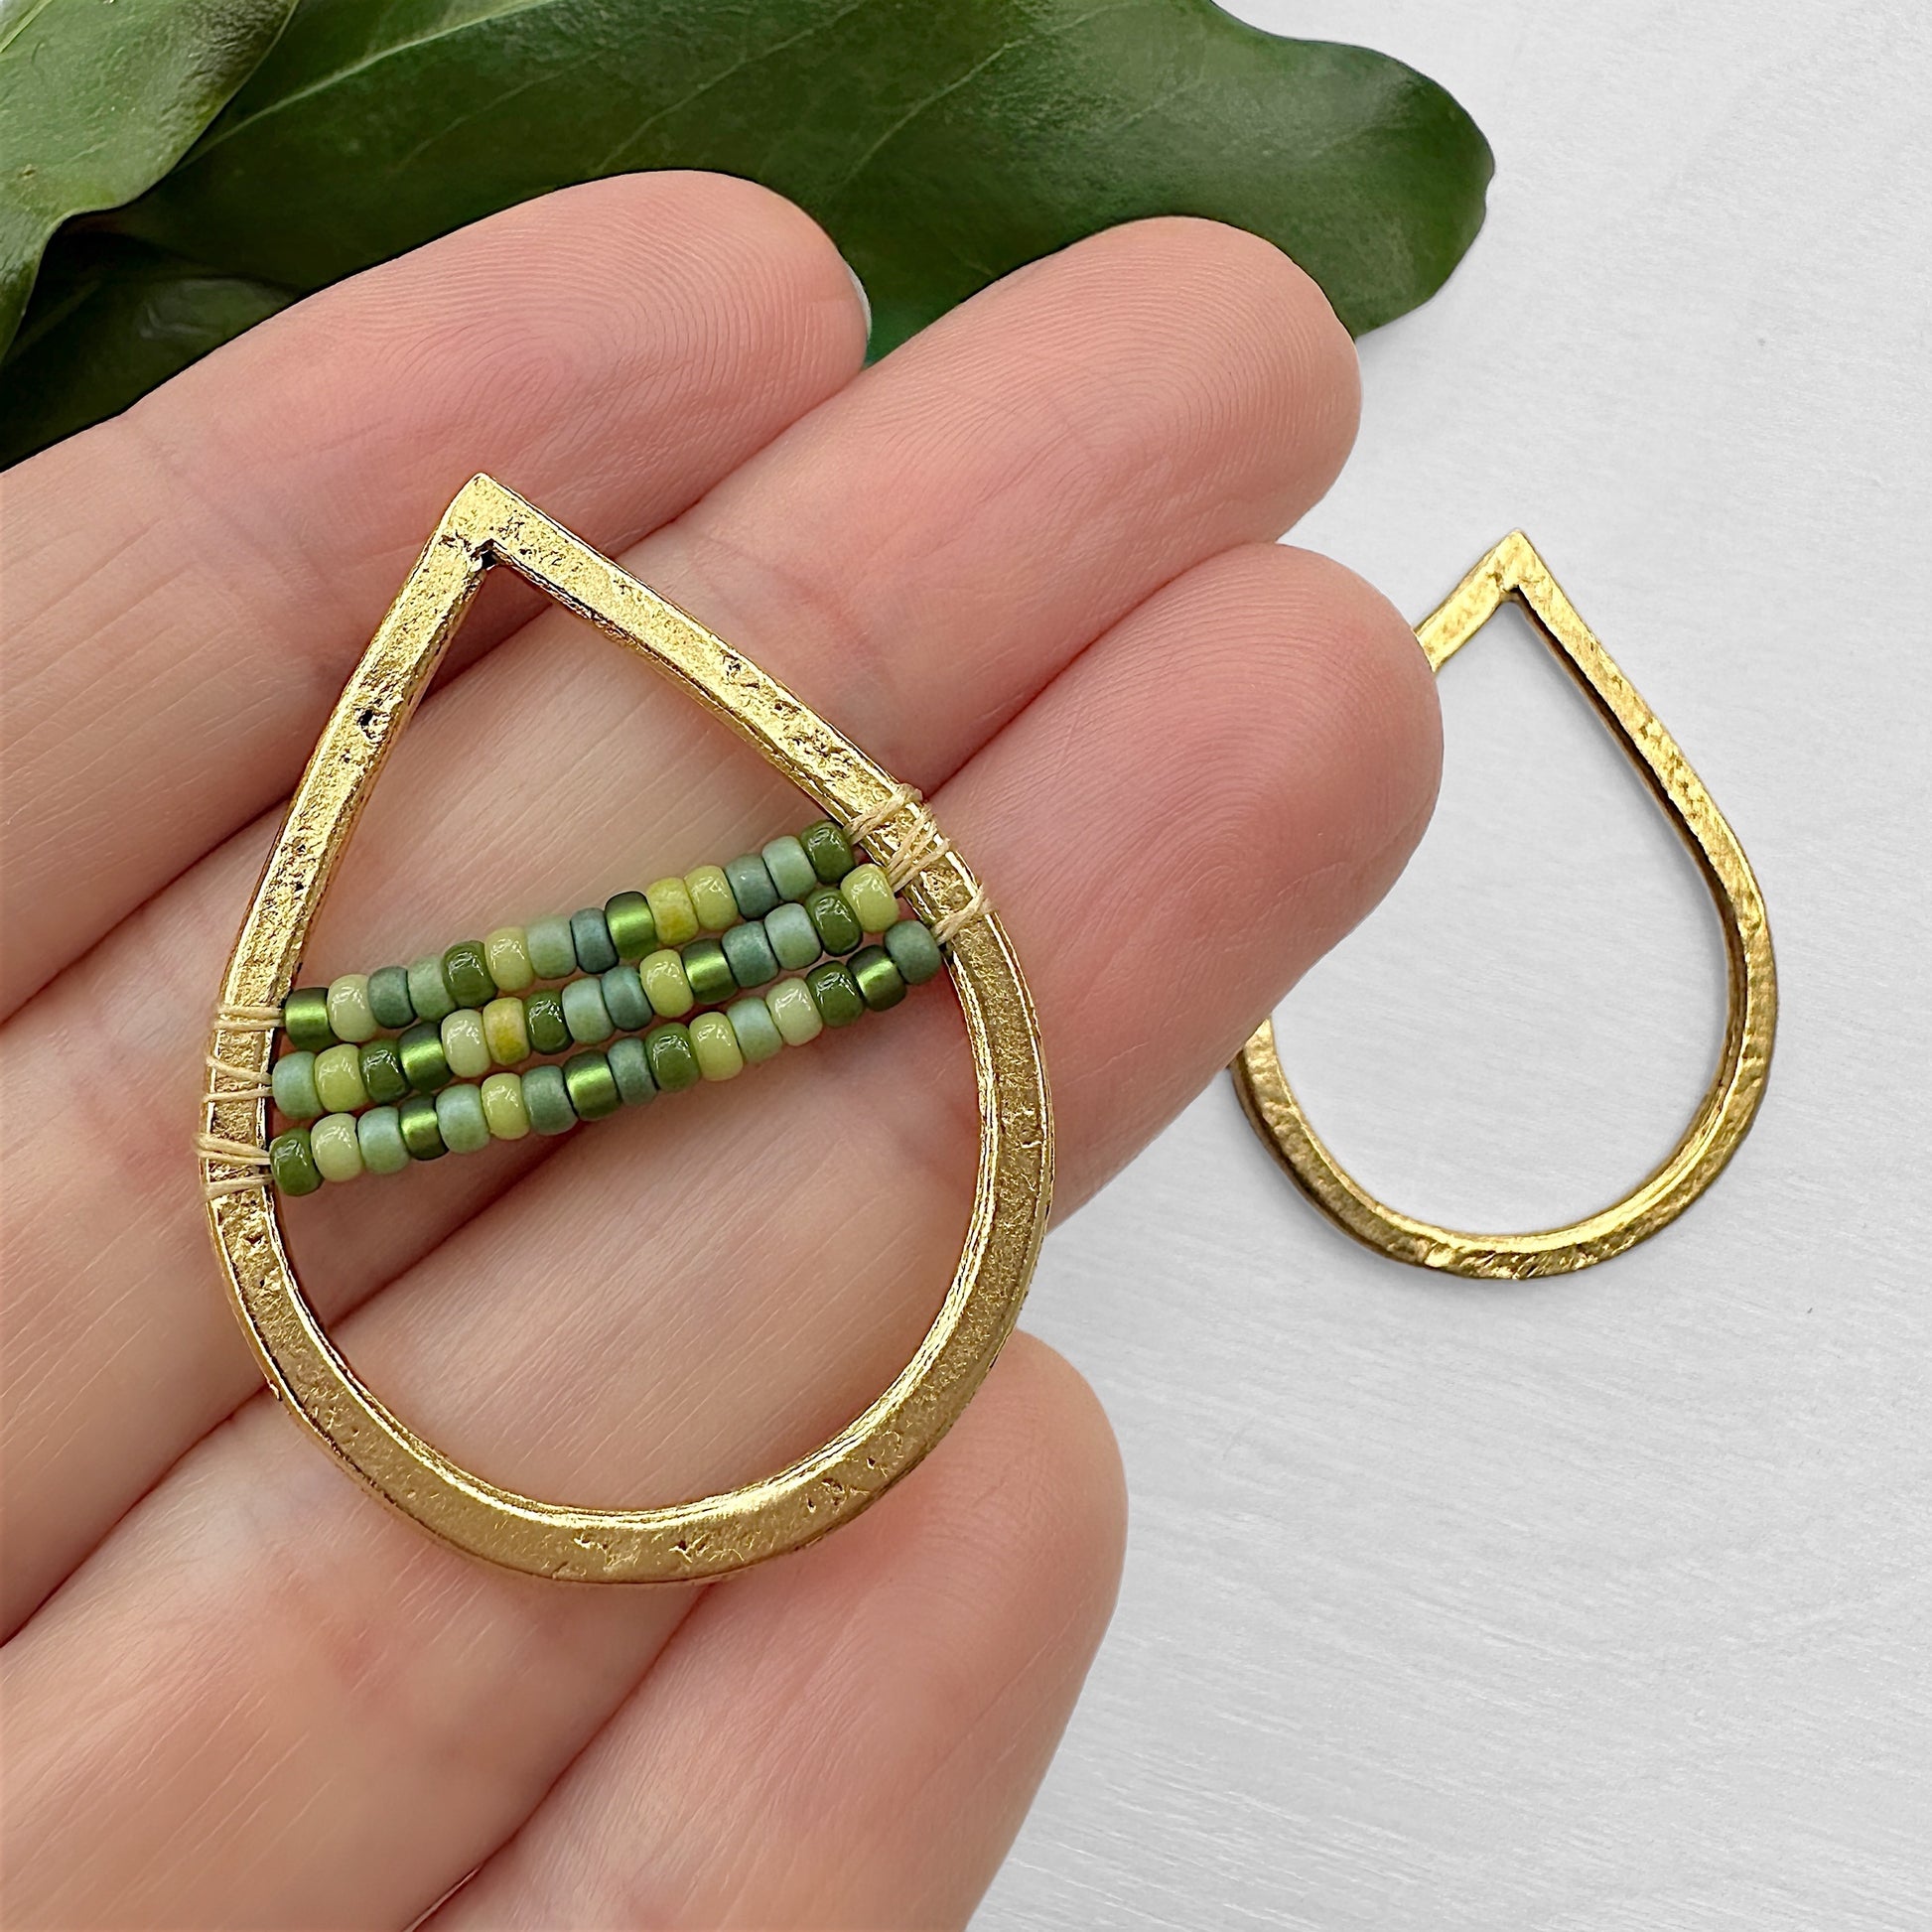 Gold teardrop-shaped earrings with Green Magic 11/0 Miyuki Seed Bead Mix accents, displayed on a green leaf against a white background. One earring is filled with beads, and the other is empty.